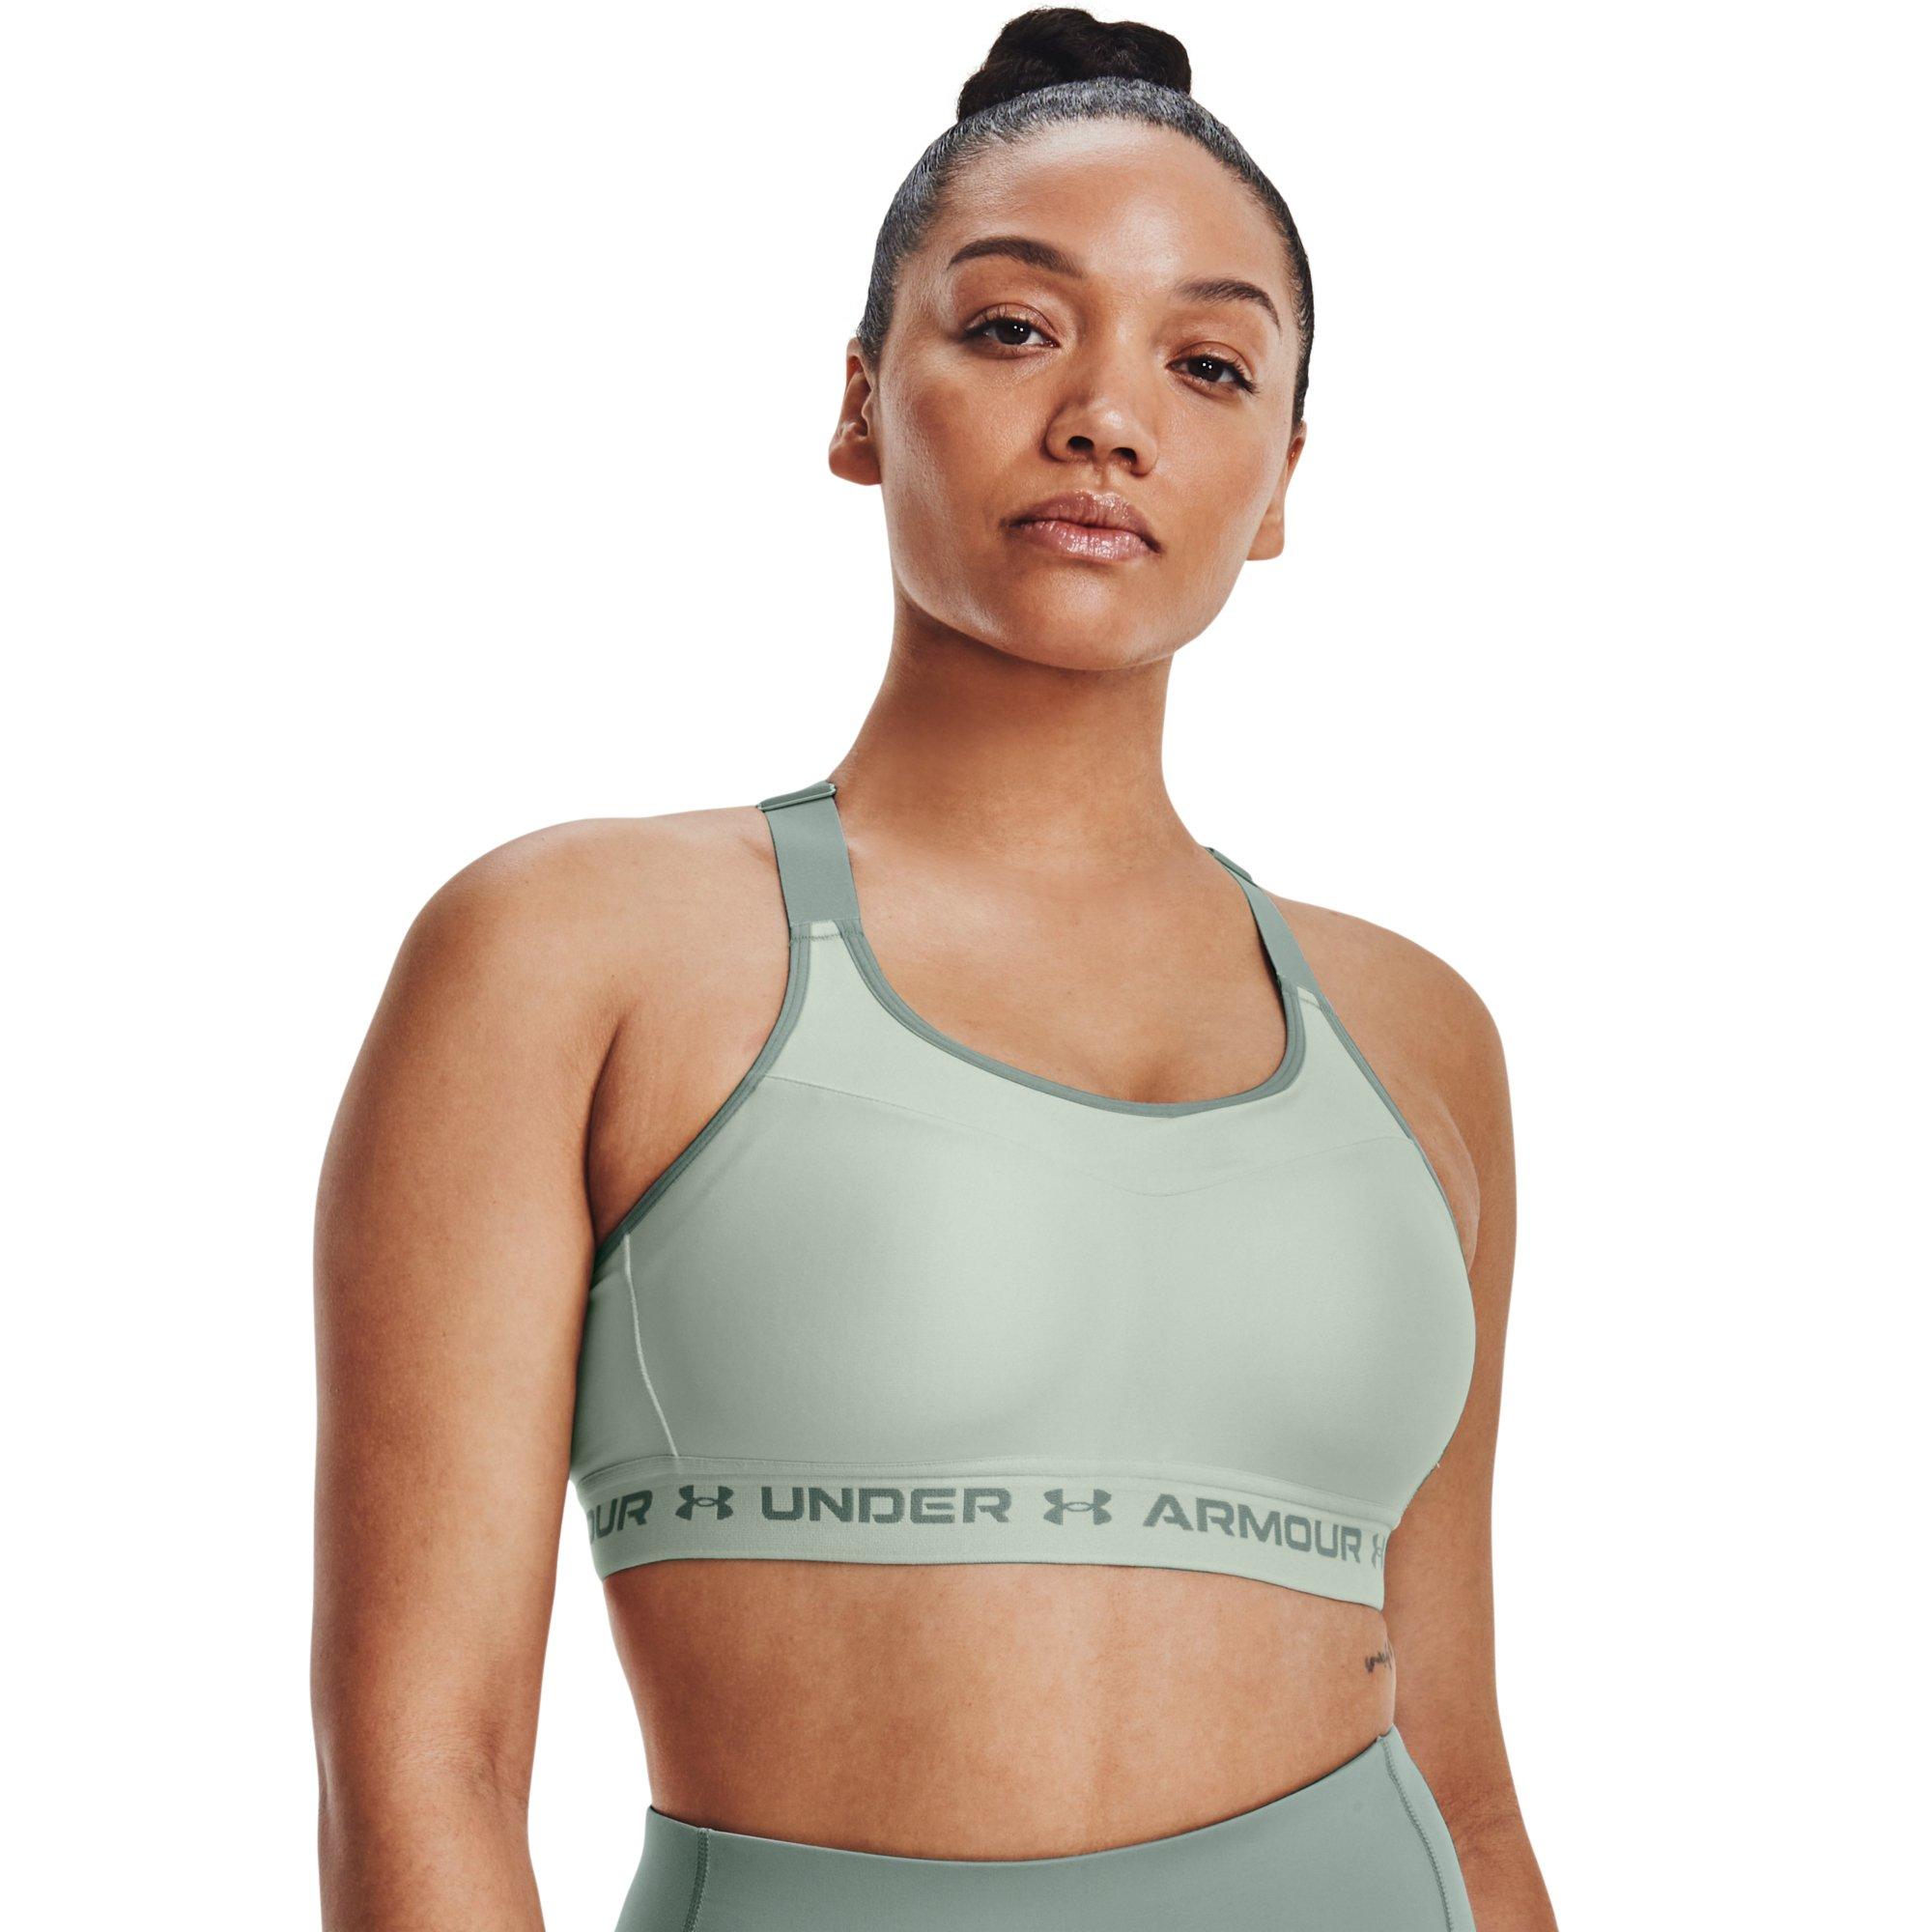 UNDER ARMOUR Women's Armour High-Impact Compression Sports Bra NWT SIZE: 32C